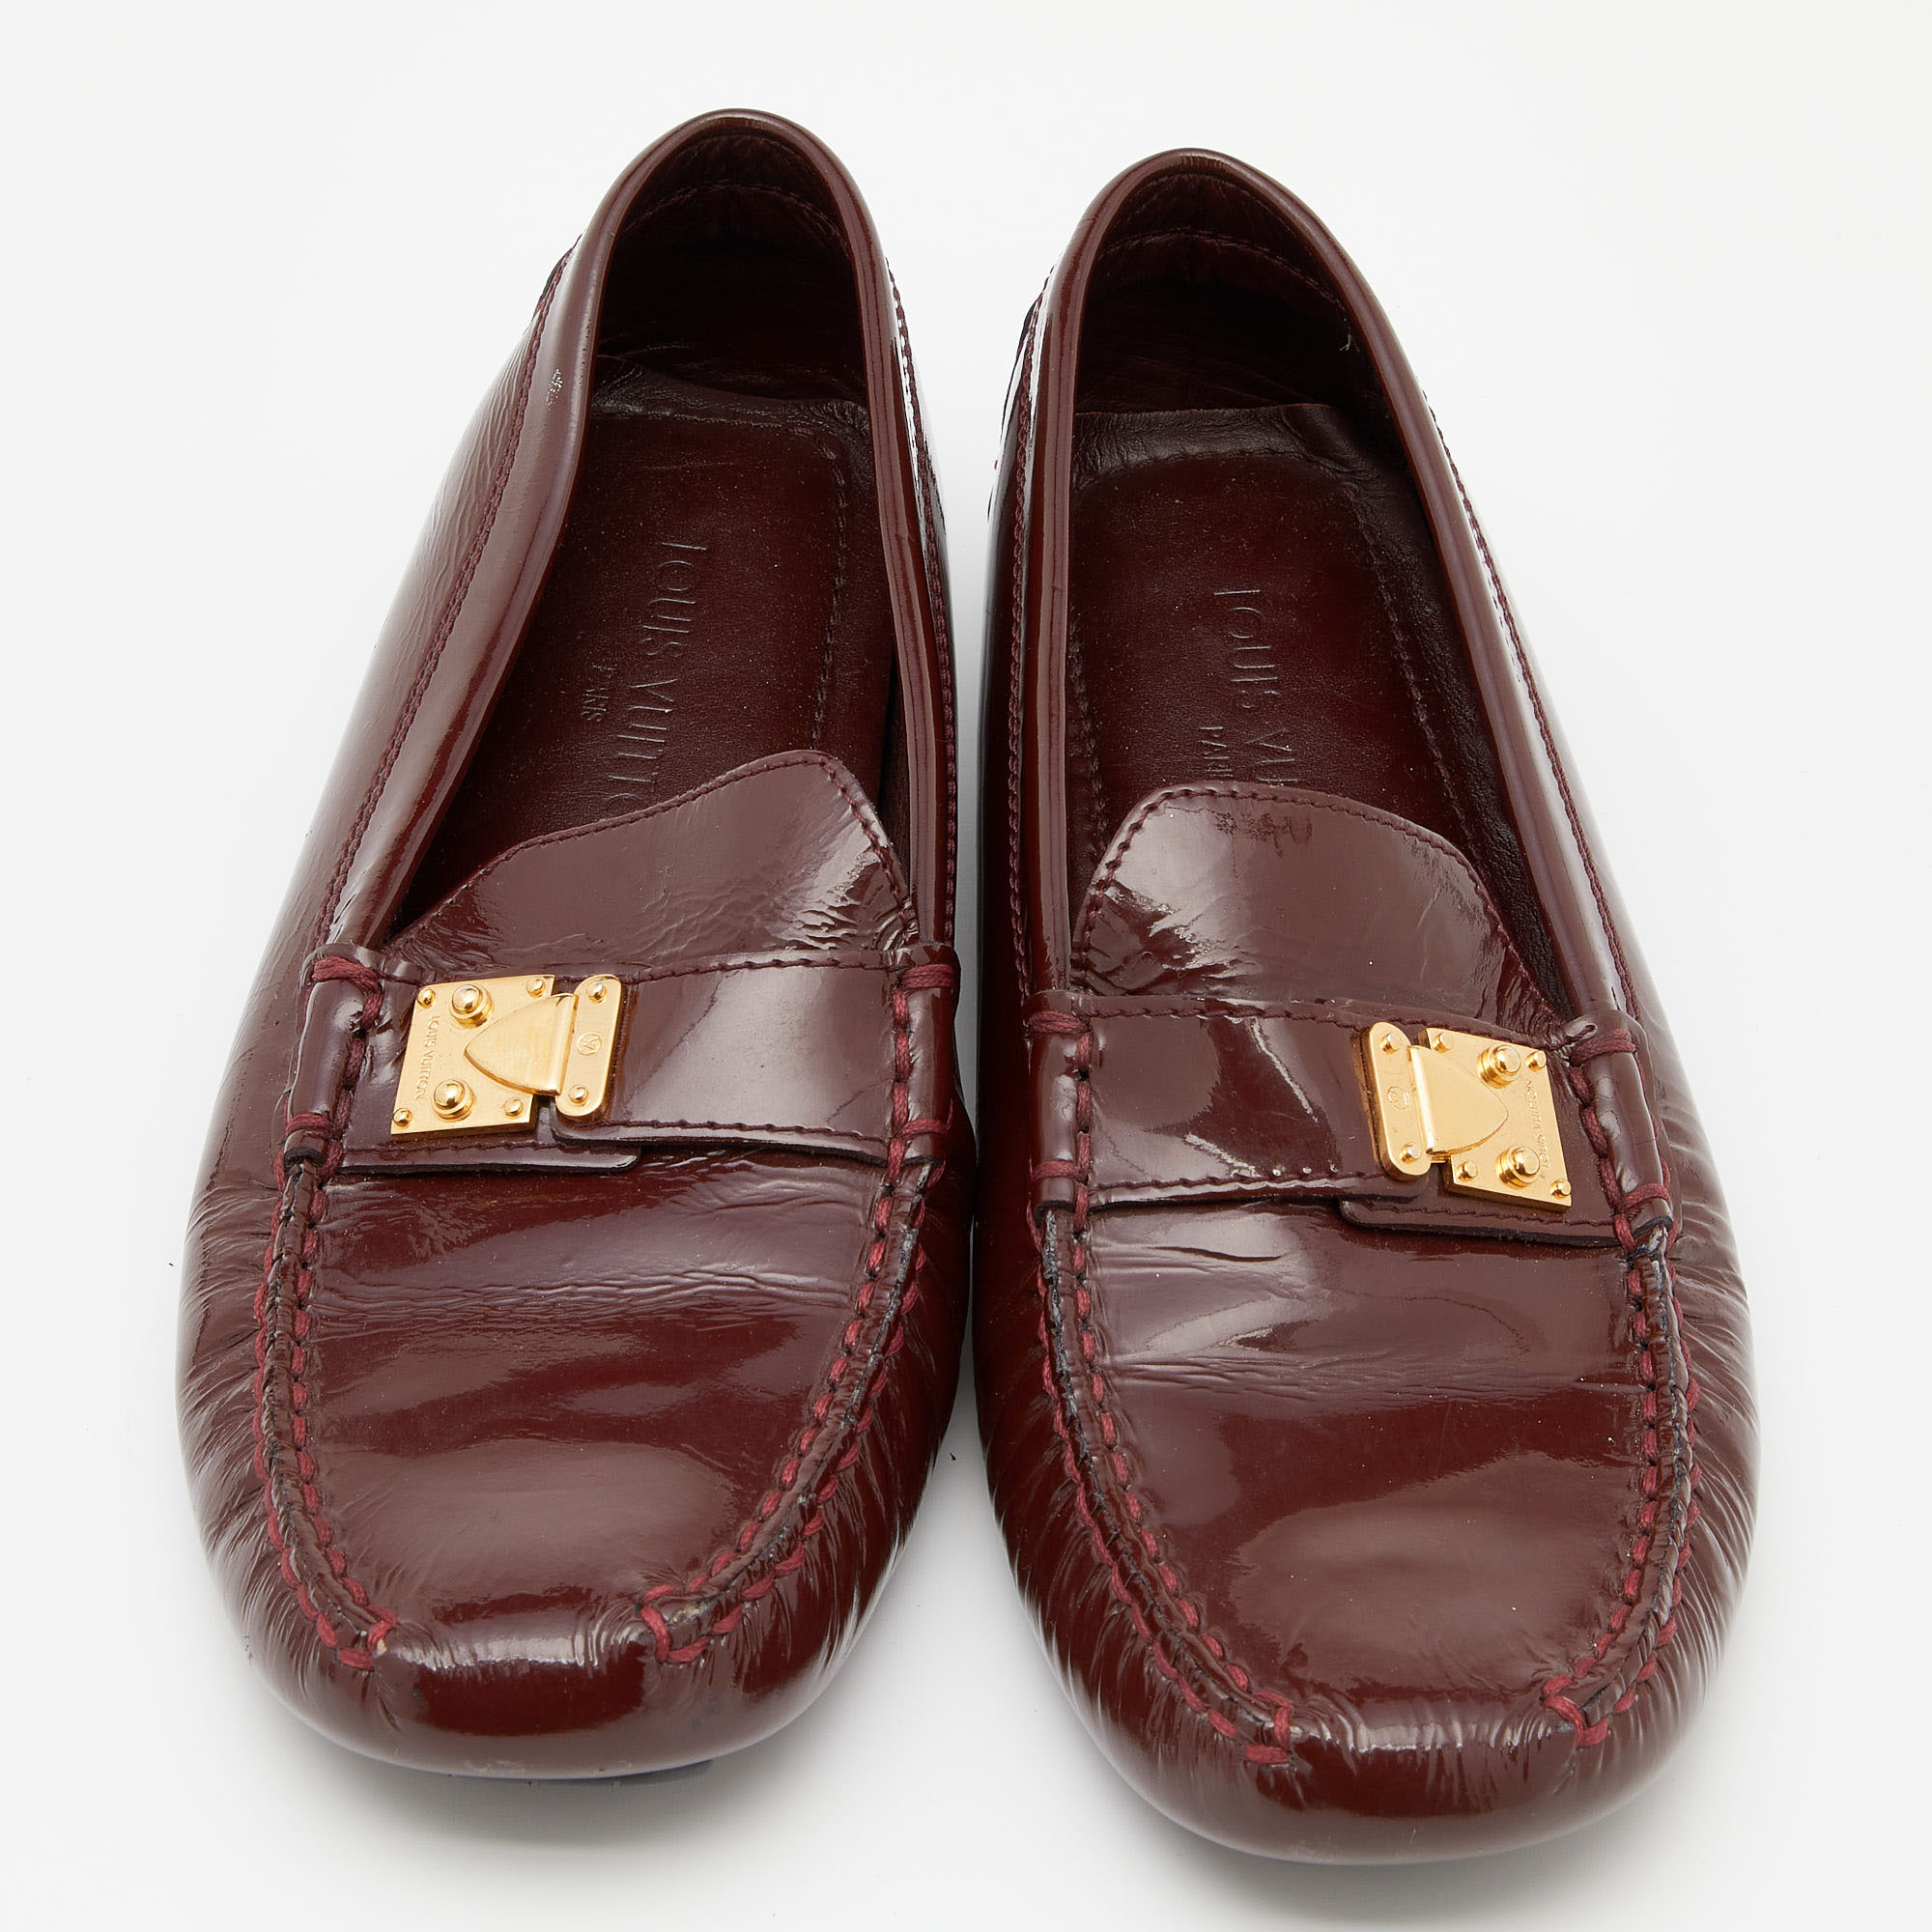 Louis Vuitton Burgundy Patent Leather Slip On Loafers Size 37.5